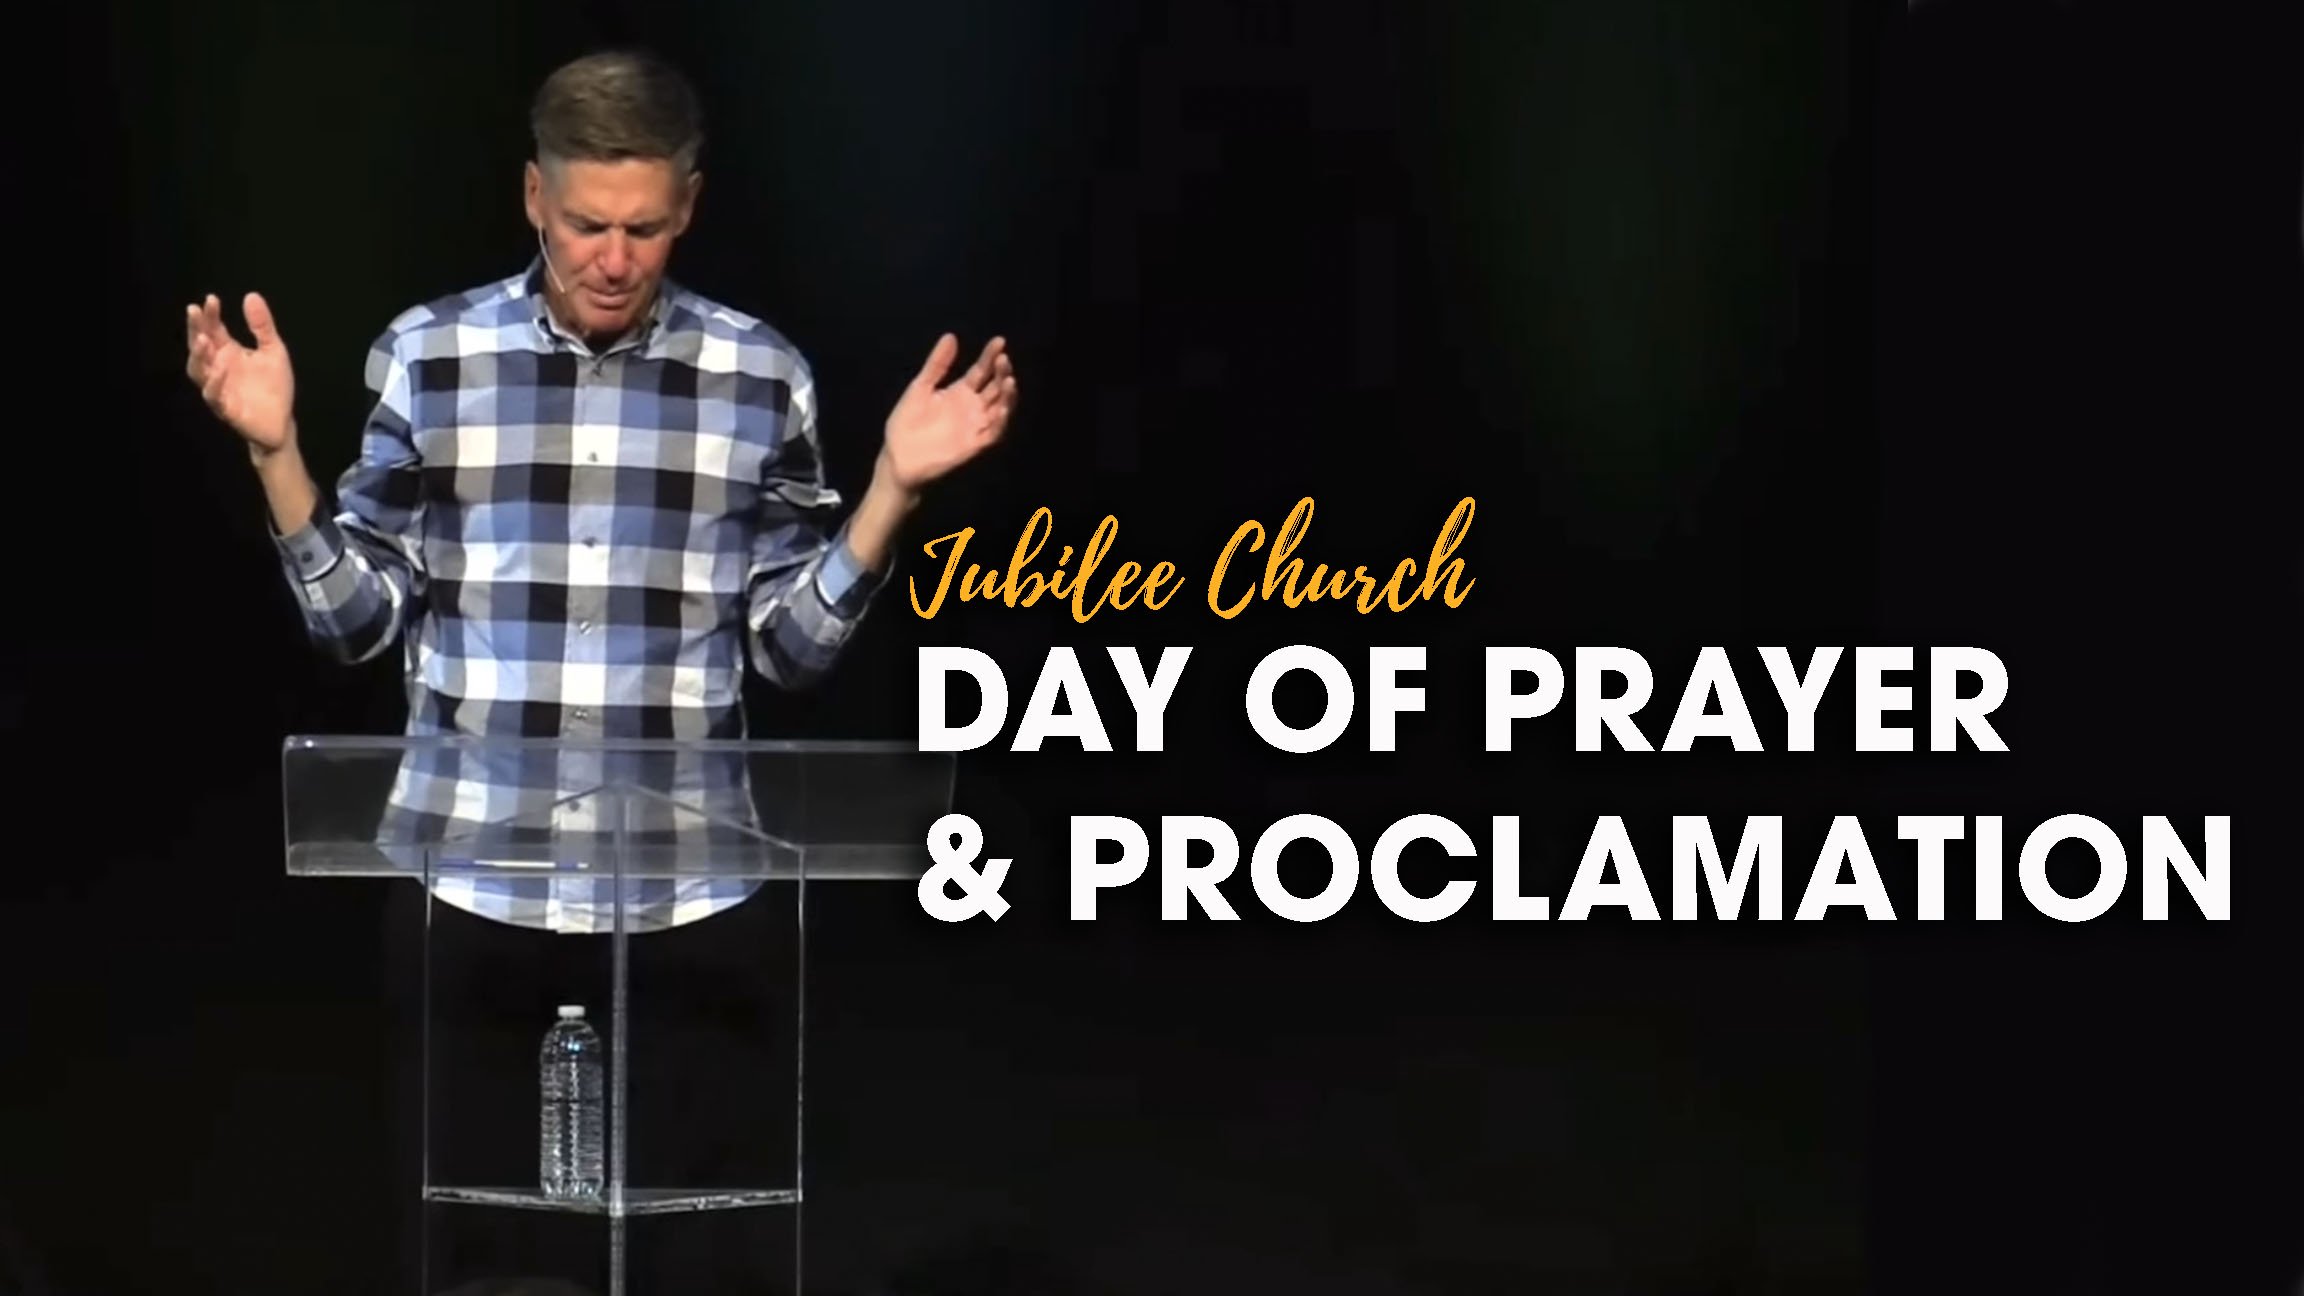 Day of Prayer Proclamation and Demonstration